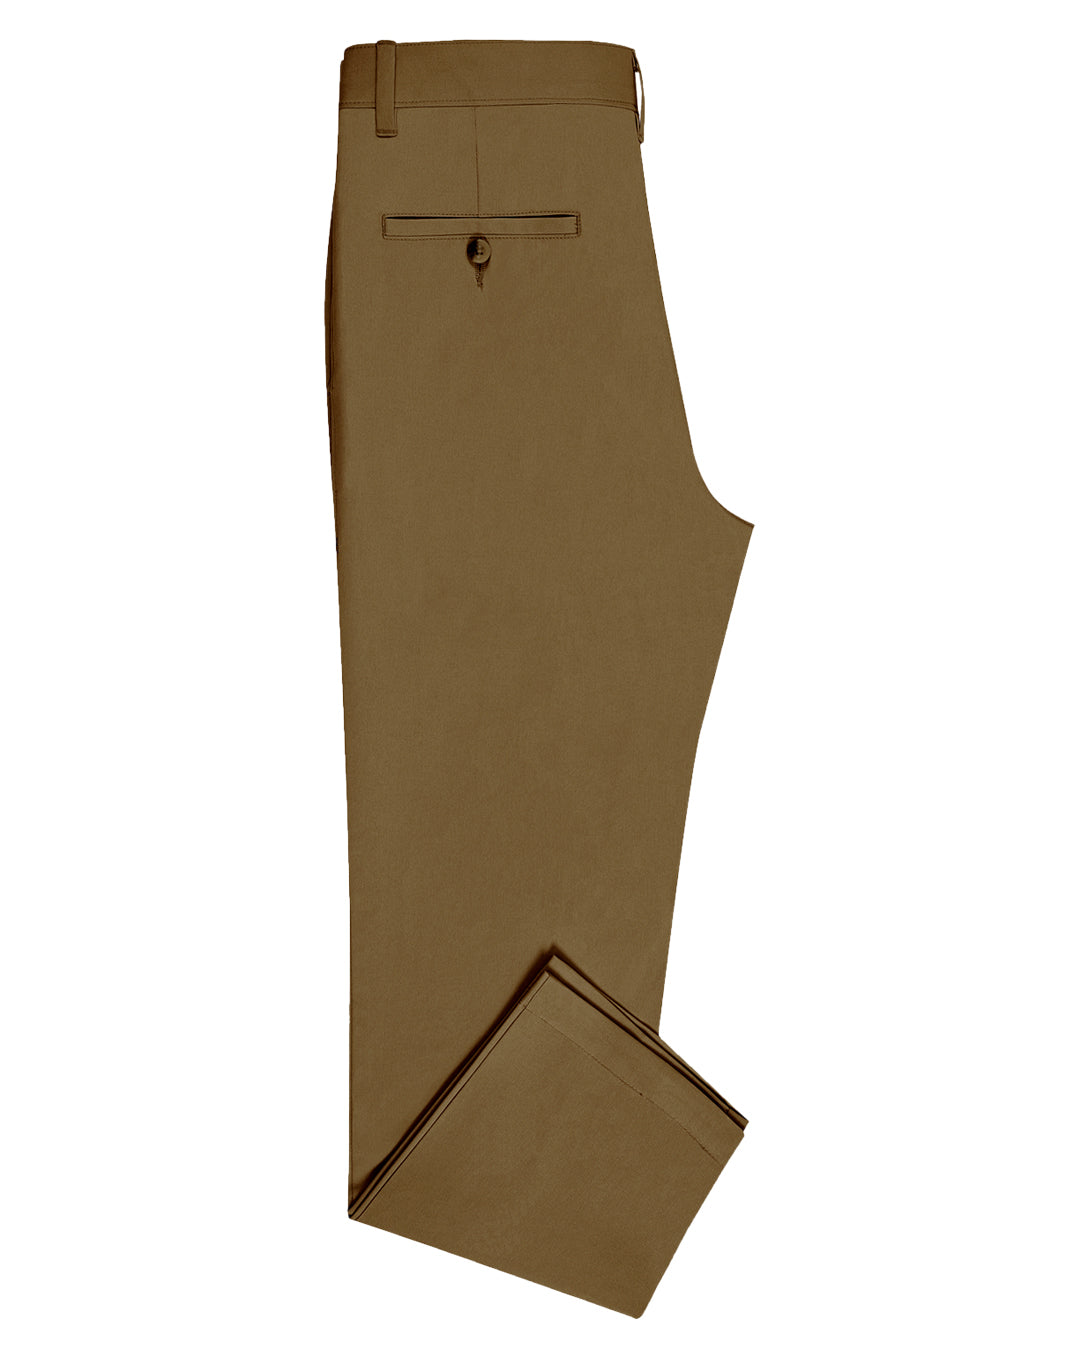 Side view of custom Genoa Chino pants for men by Luxire in copper